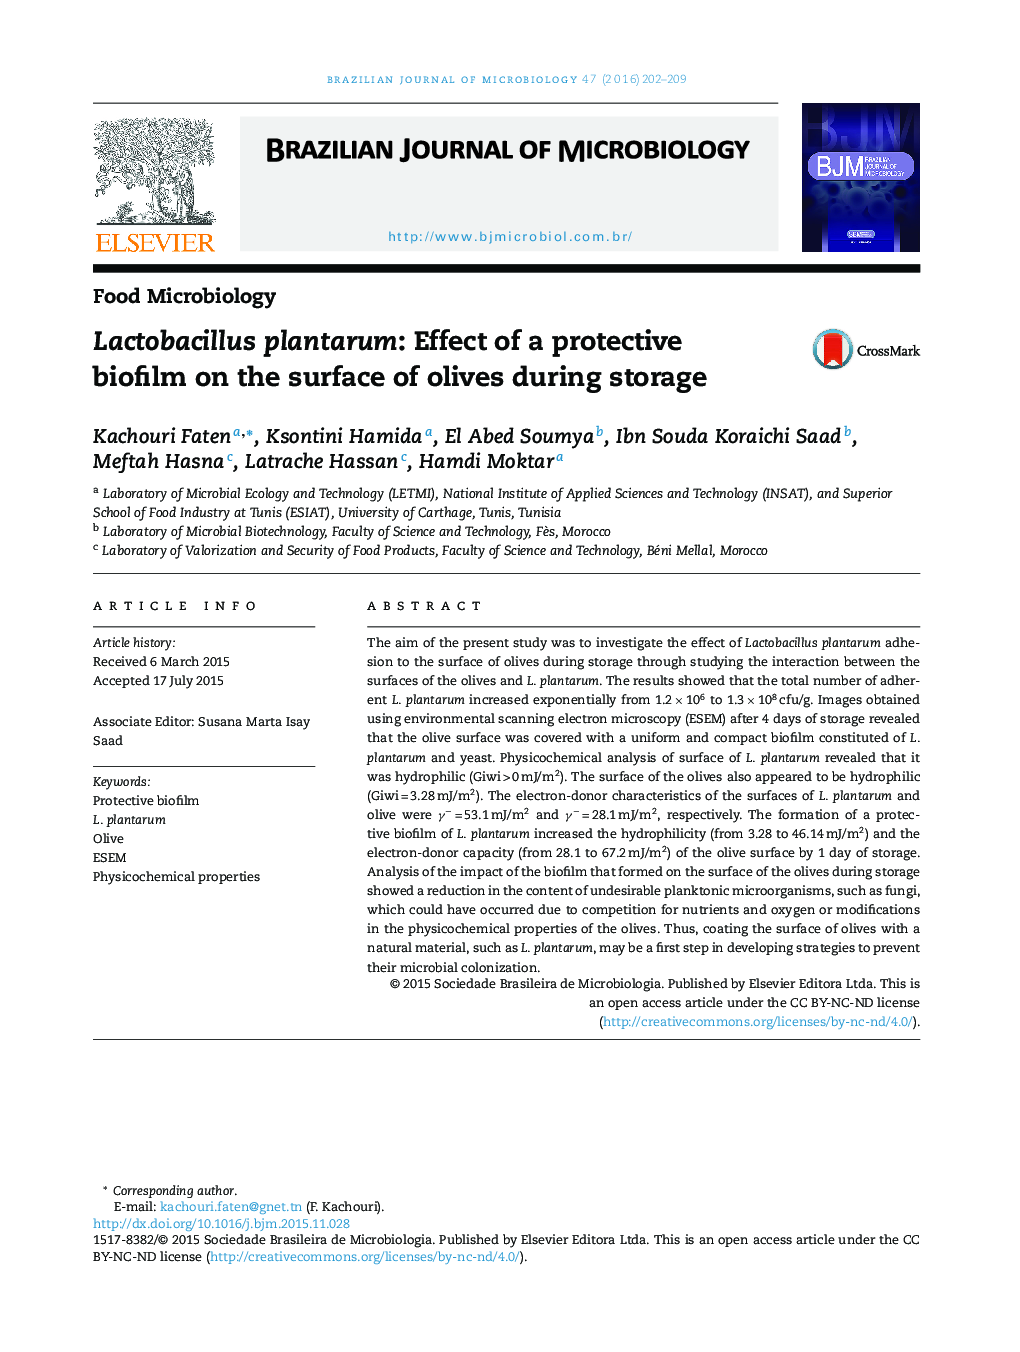 Lactobacillus plantarum: Effect of a protective biofilm on the surface of olives during storage